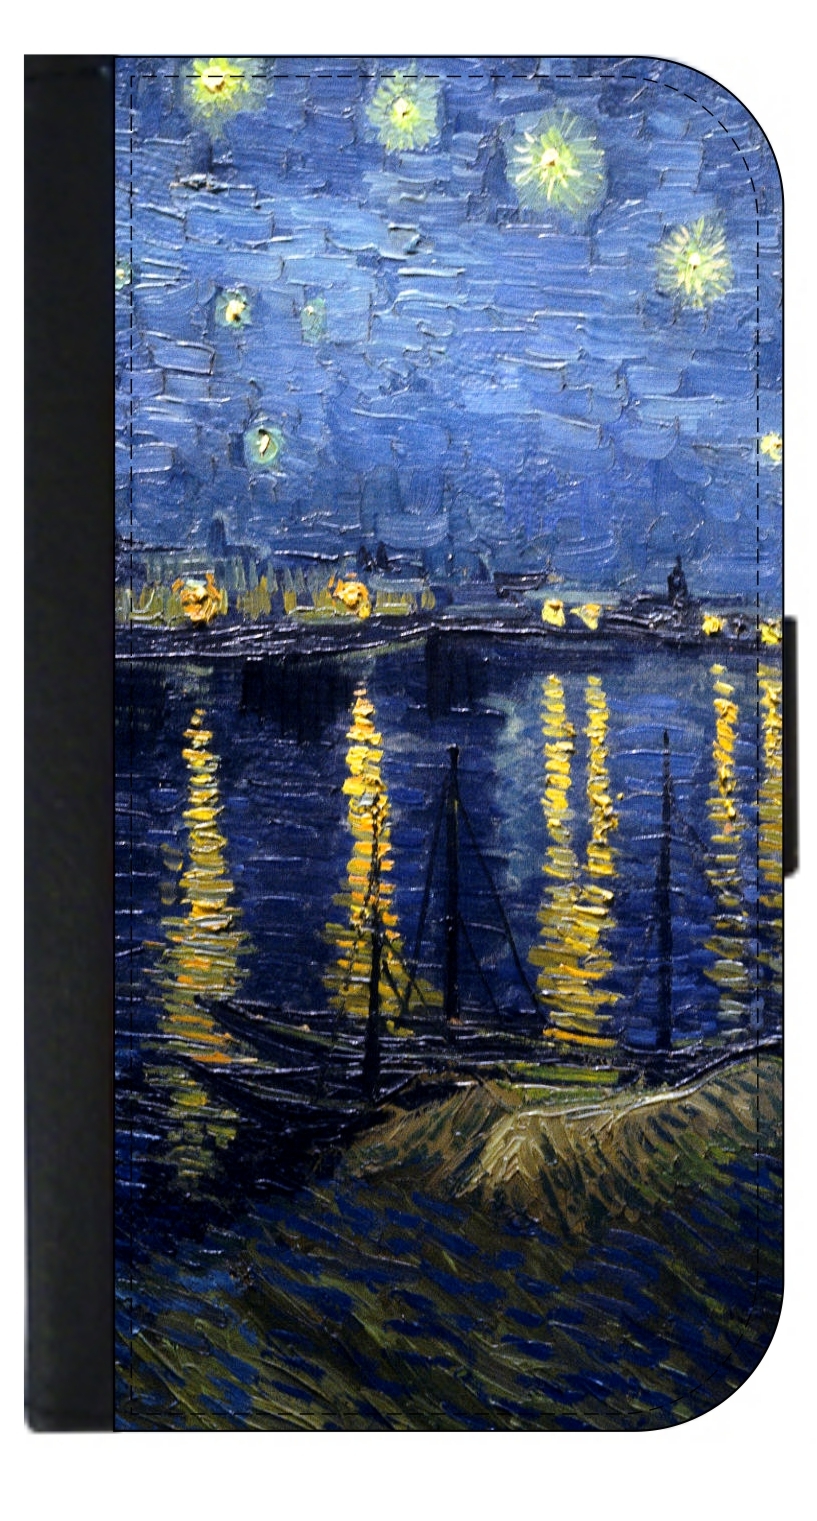 Artist Vincent Van Gogh's Starry Night Over the Rhone Painting - Galaxy s10p Case - Galaxy s10 Plus Case - Galaxy s10 Plus Wallet Case - s10 Plus Case Wallet - Galaxy s10 Plus Case Wallet - s10 Plus C - image 1 of 3